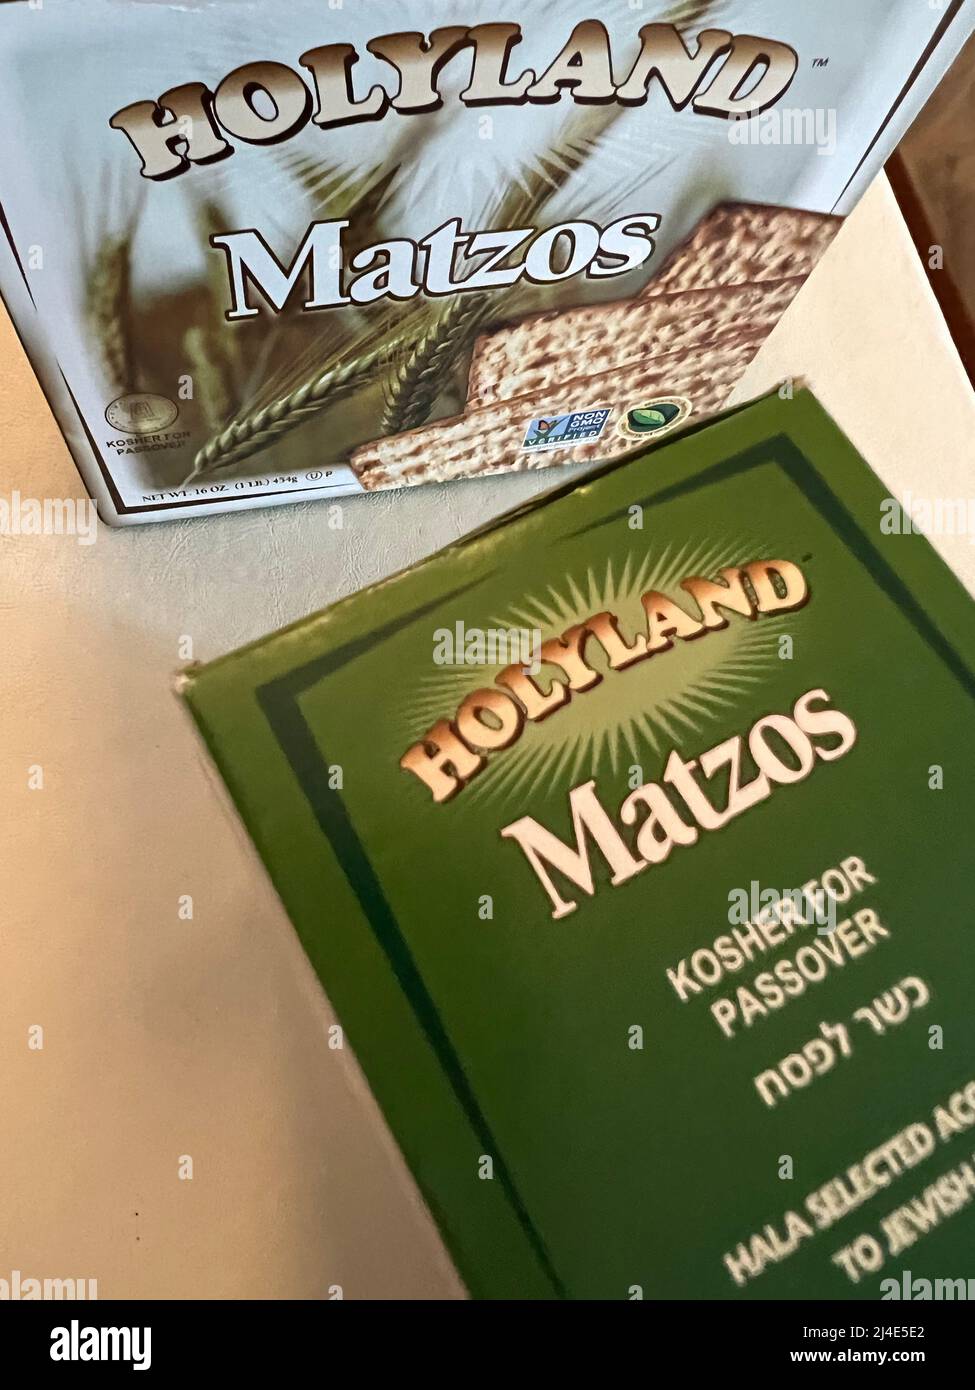 New York, United States. 14th Apr, 2022. Boxes of Holyland Matzos are on display in New York on April 14, 2022. The unleavened bread is eaten by Jews during Passover in commemoration of their Exodus from Egypt. (Photo by Samuel Rigelhaupt/Sipa USA) Credit: Sipa USA/Alamy Live News Stock Photo